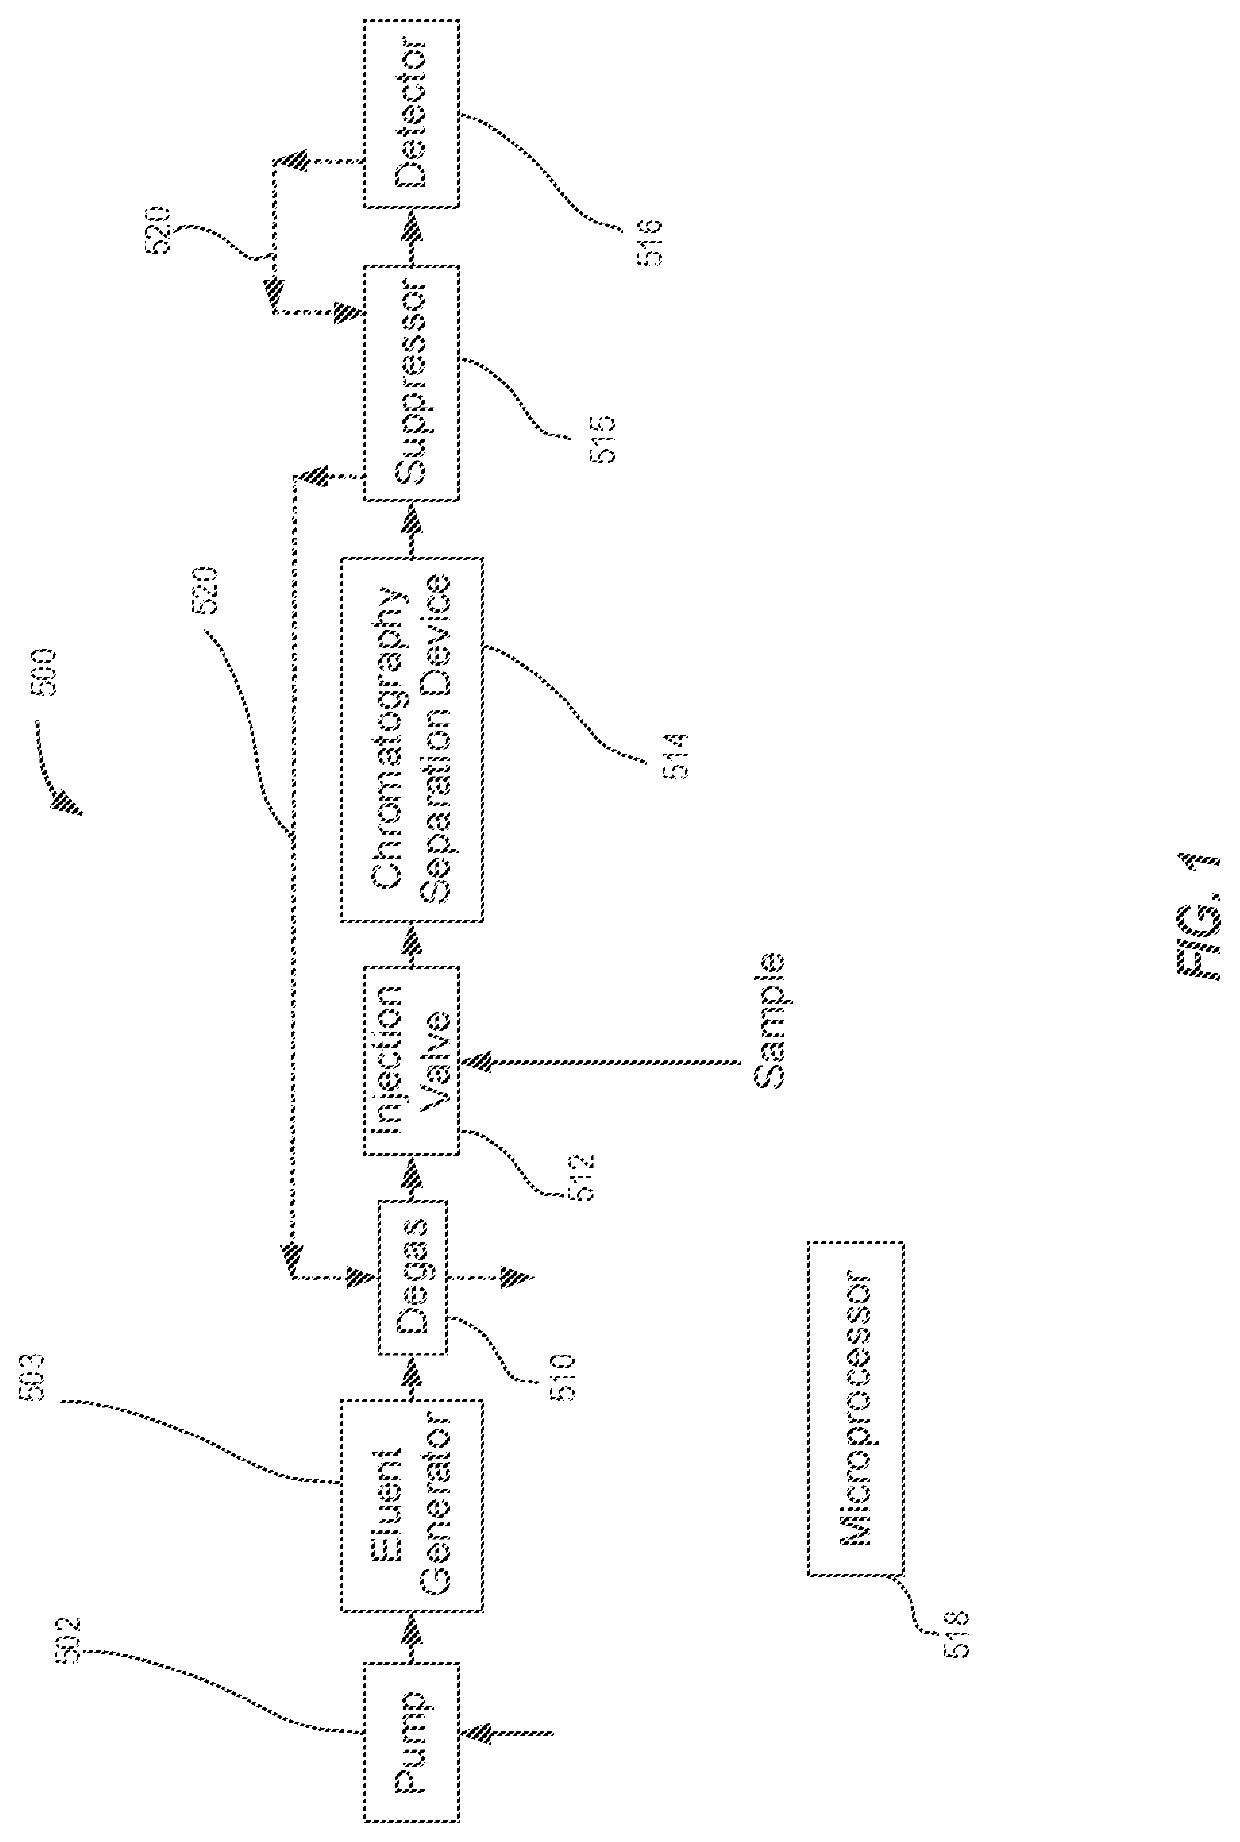 Fast startup ion chromatography system and methods